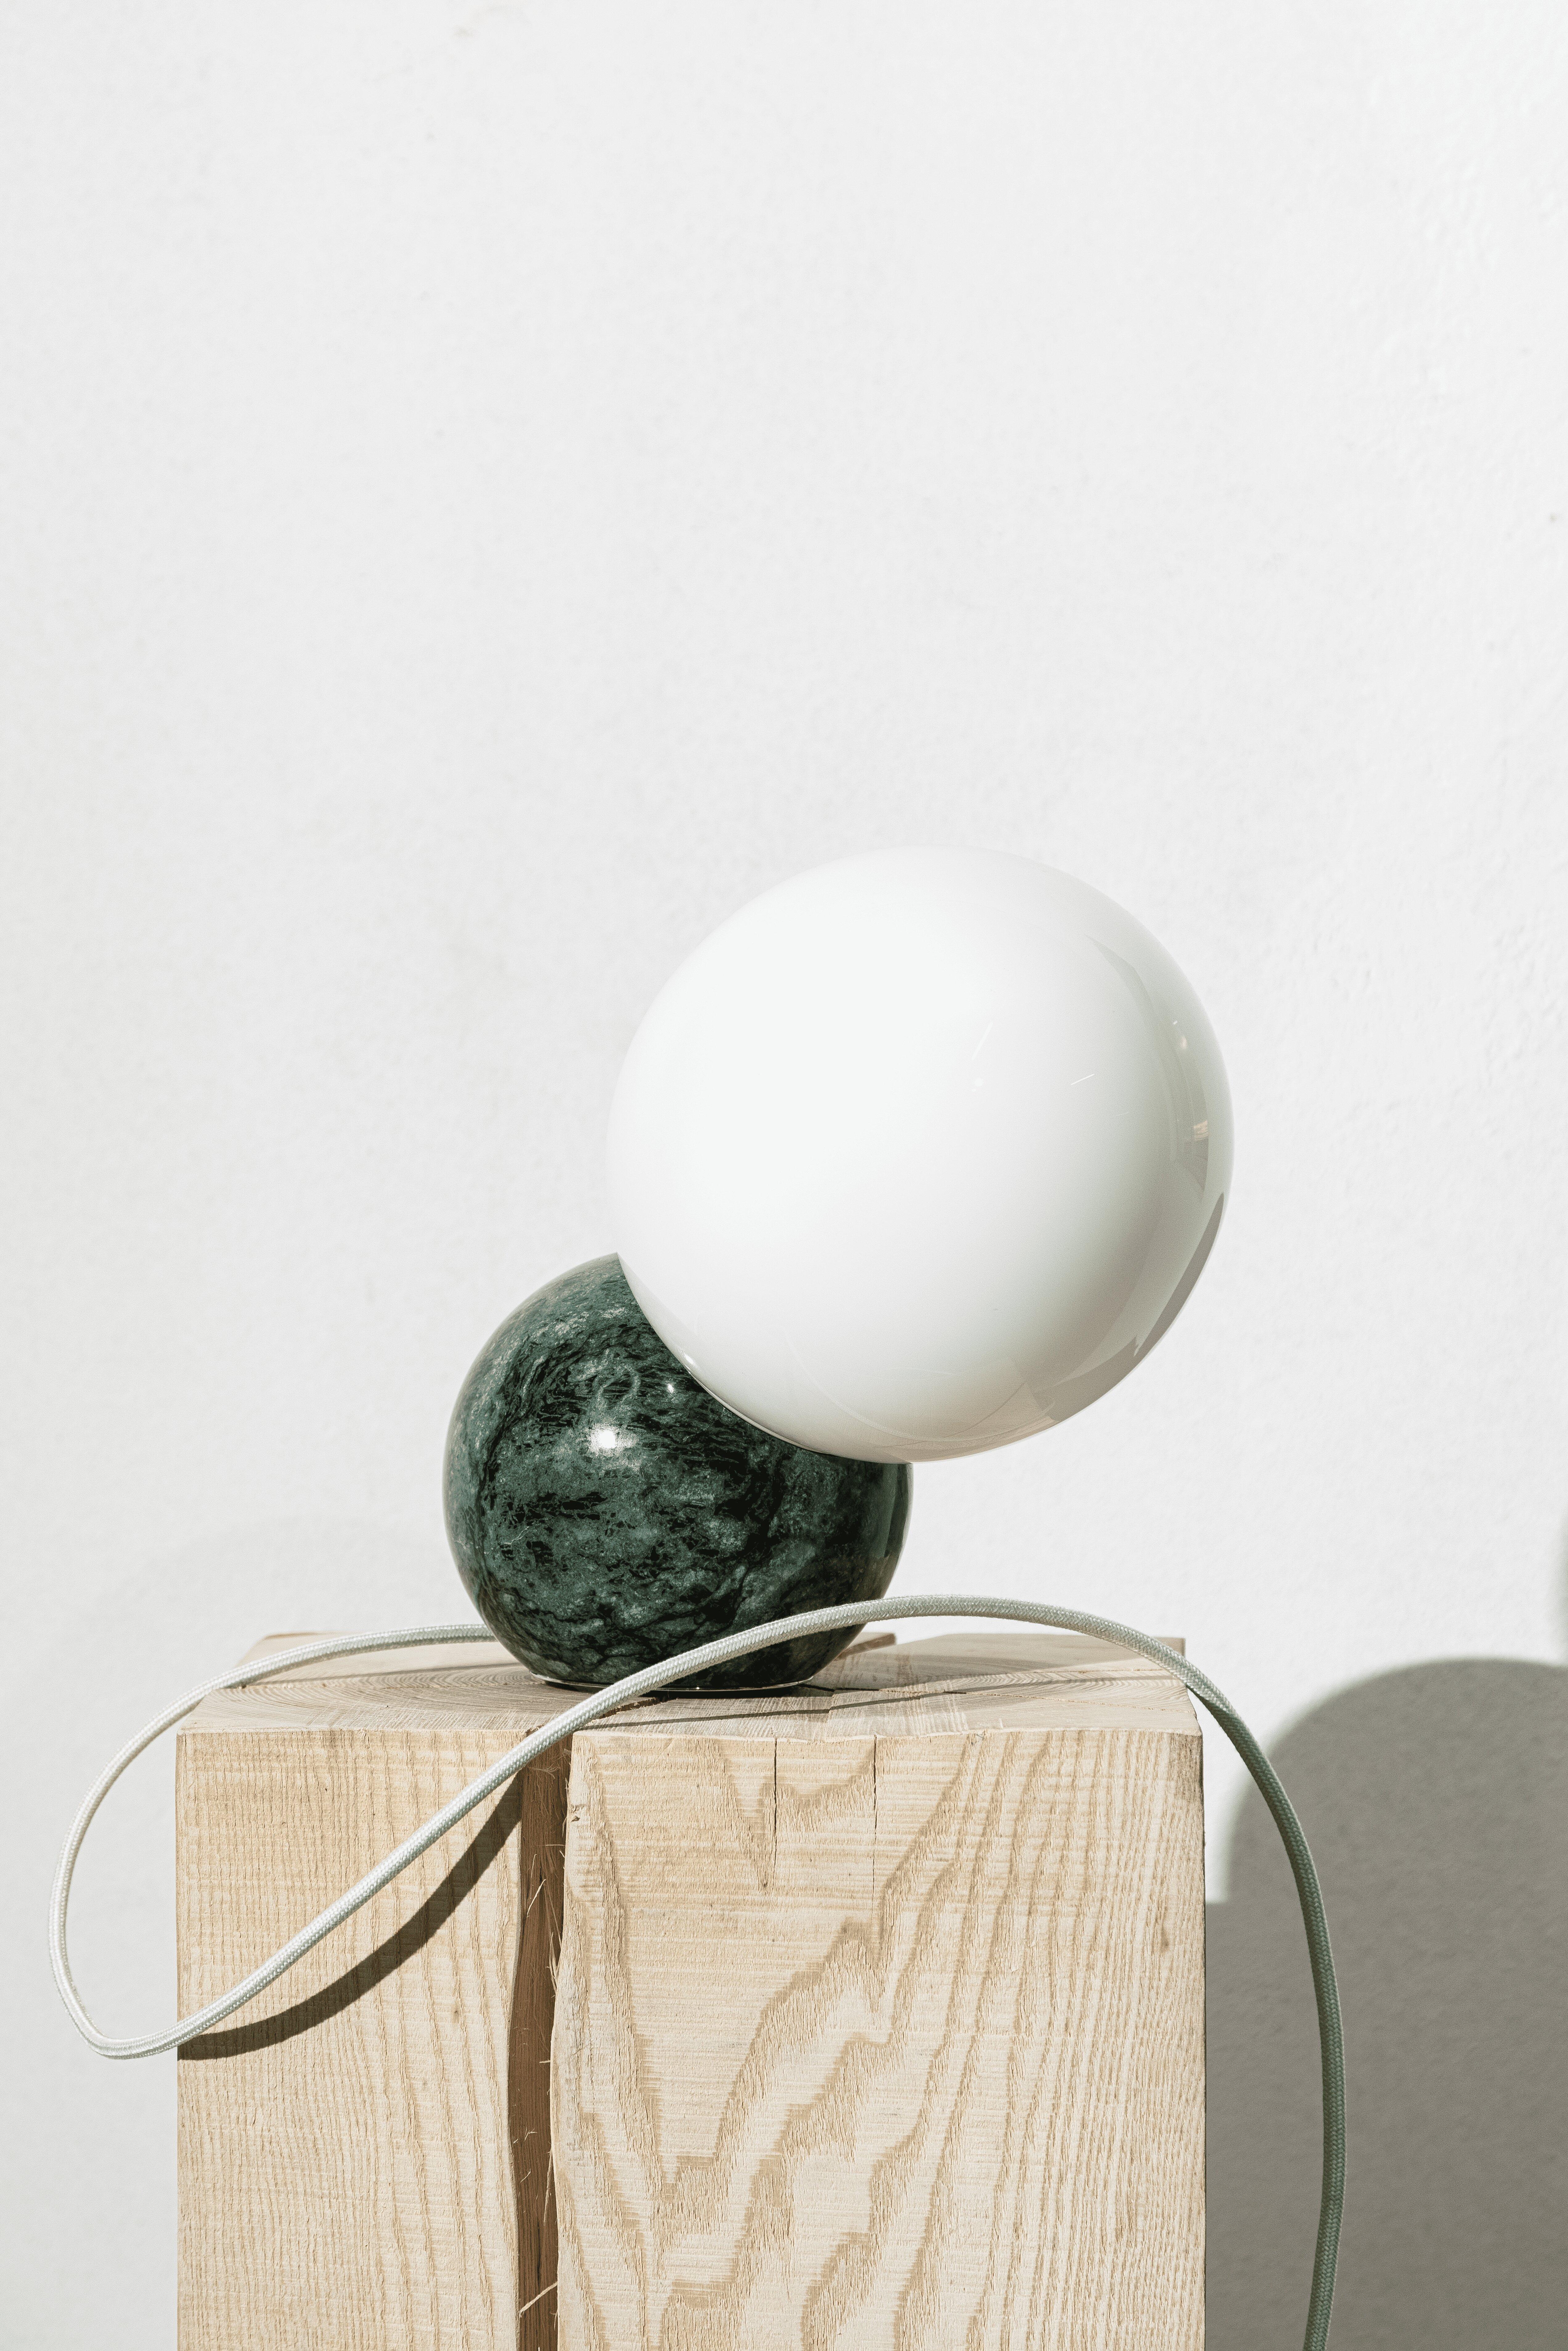 COSMOPOLITAN MIDNIGHT spherical structure transforms what could be an ordinary table lamp into a fun, personality full, lighting piece. Highlighted by its high-end materials, builds a comfortable atmosphere and adds a decorative element. Perfect for